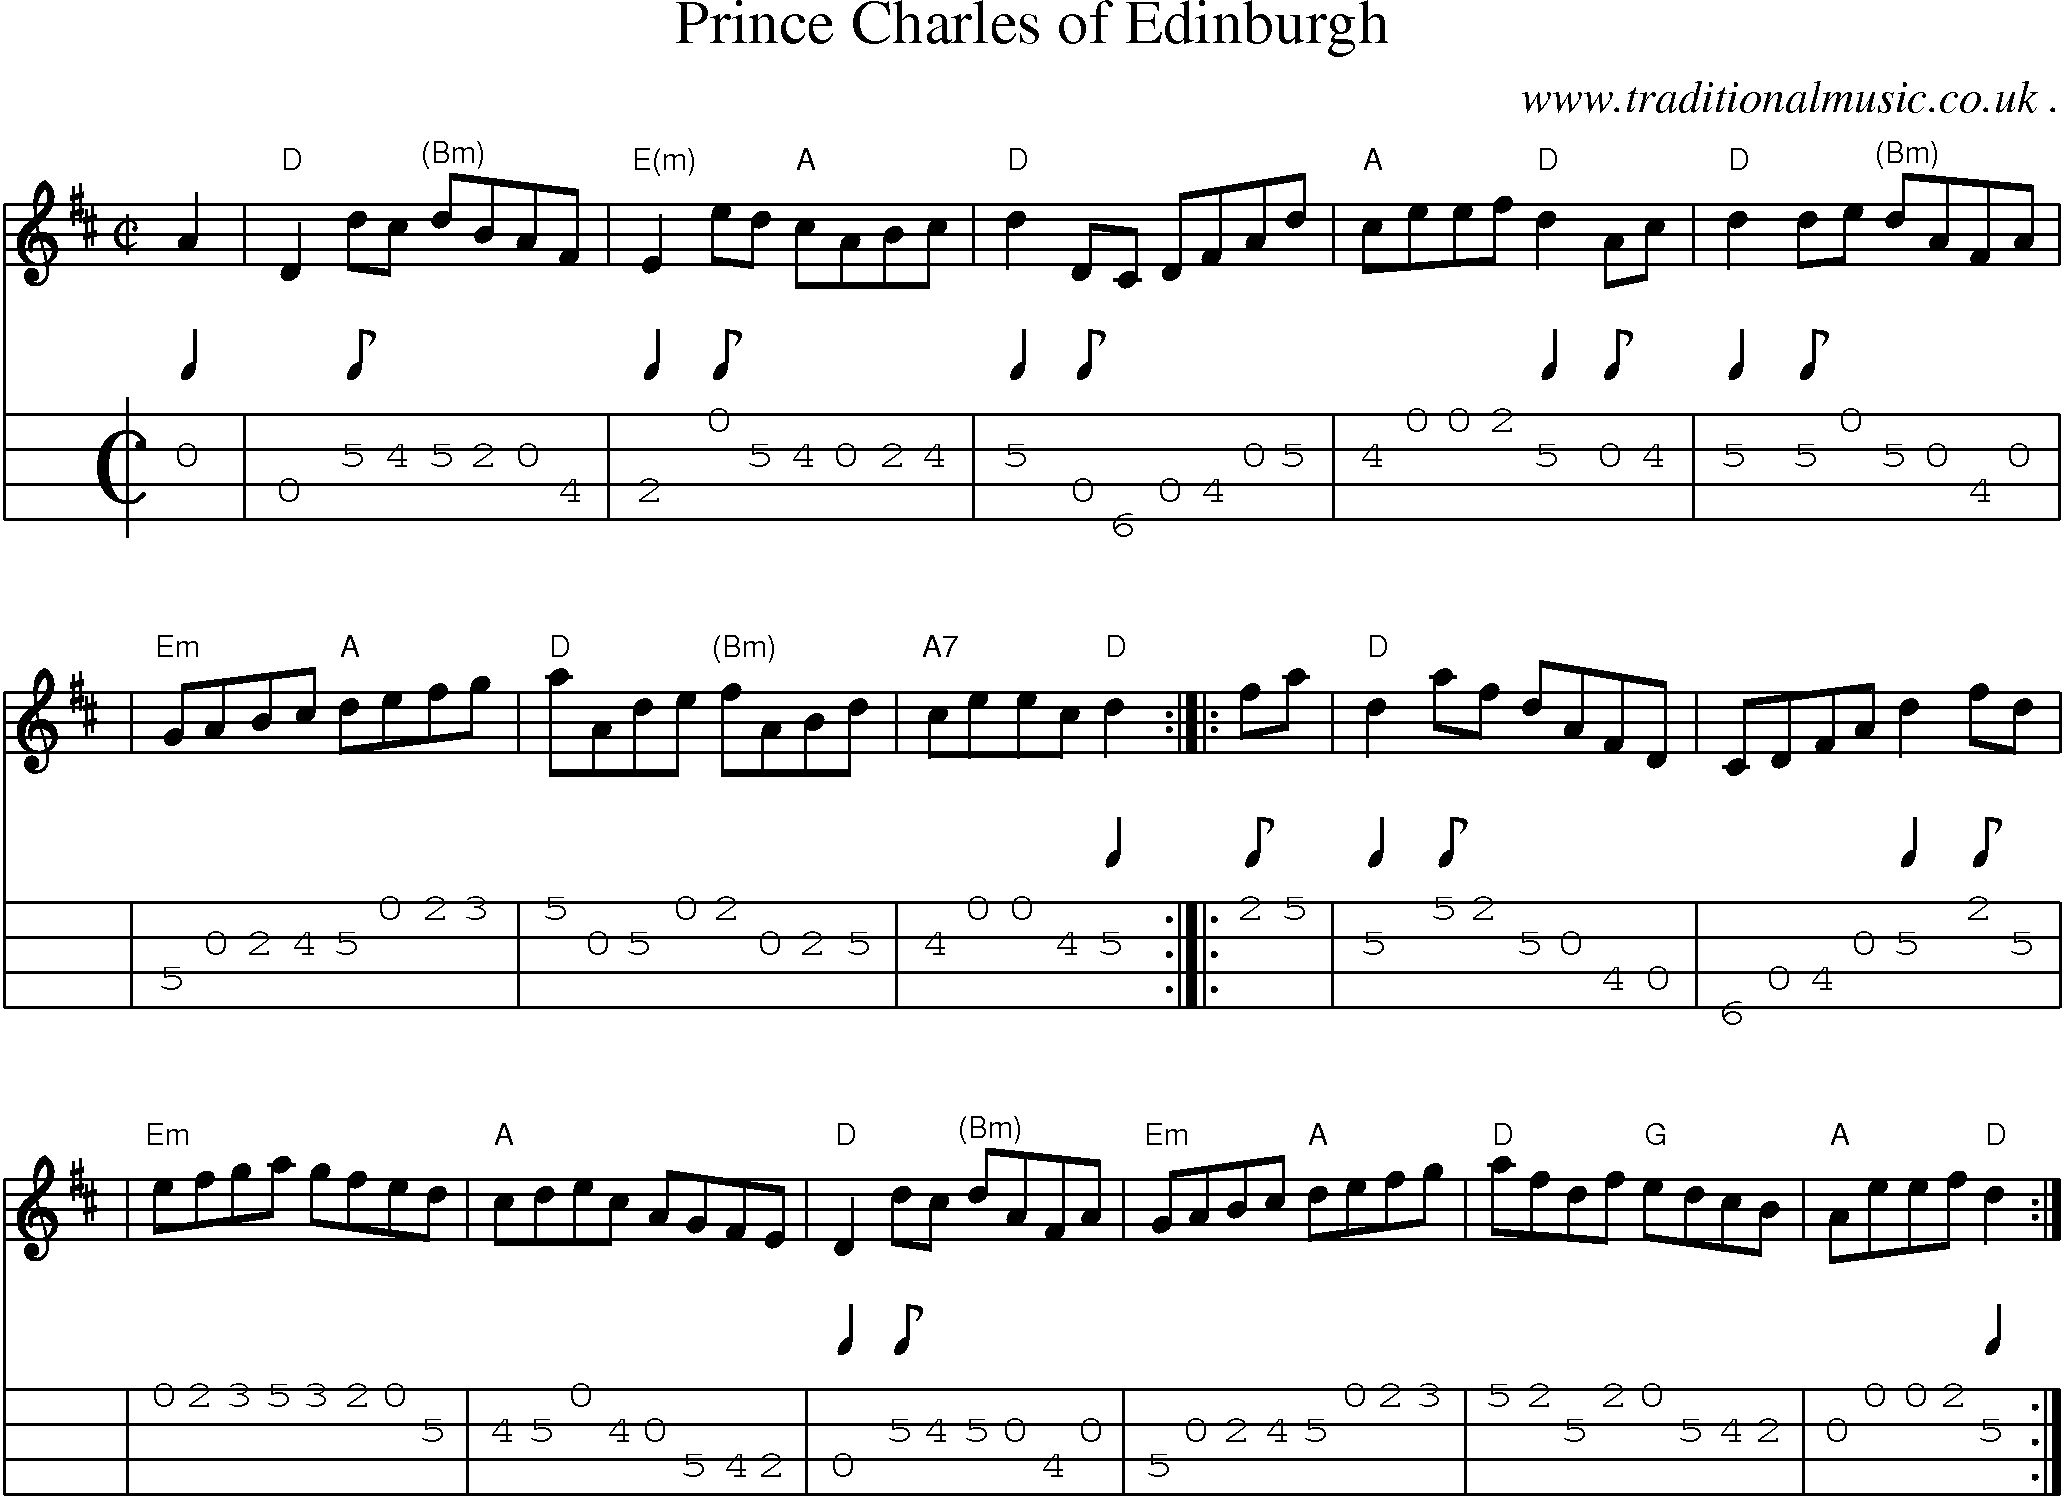 Sheet-music  score, Chords and Mandolin Tabs for Prince Charles Of Edinburgh